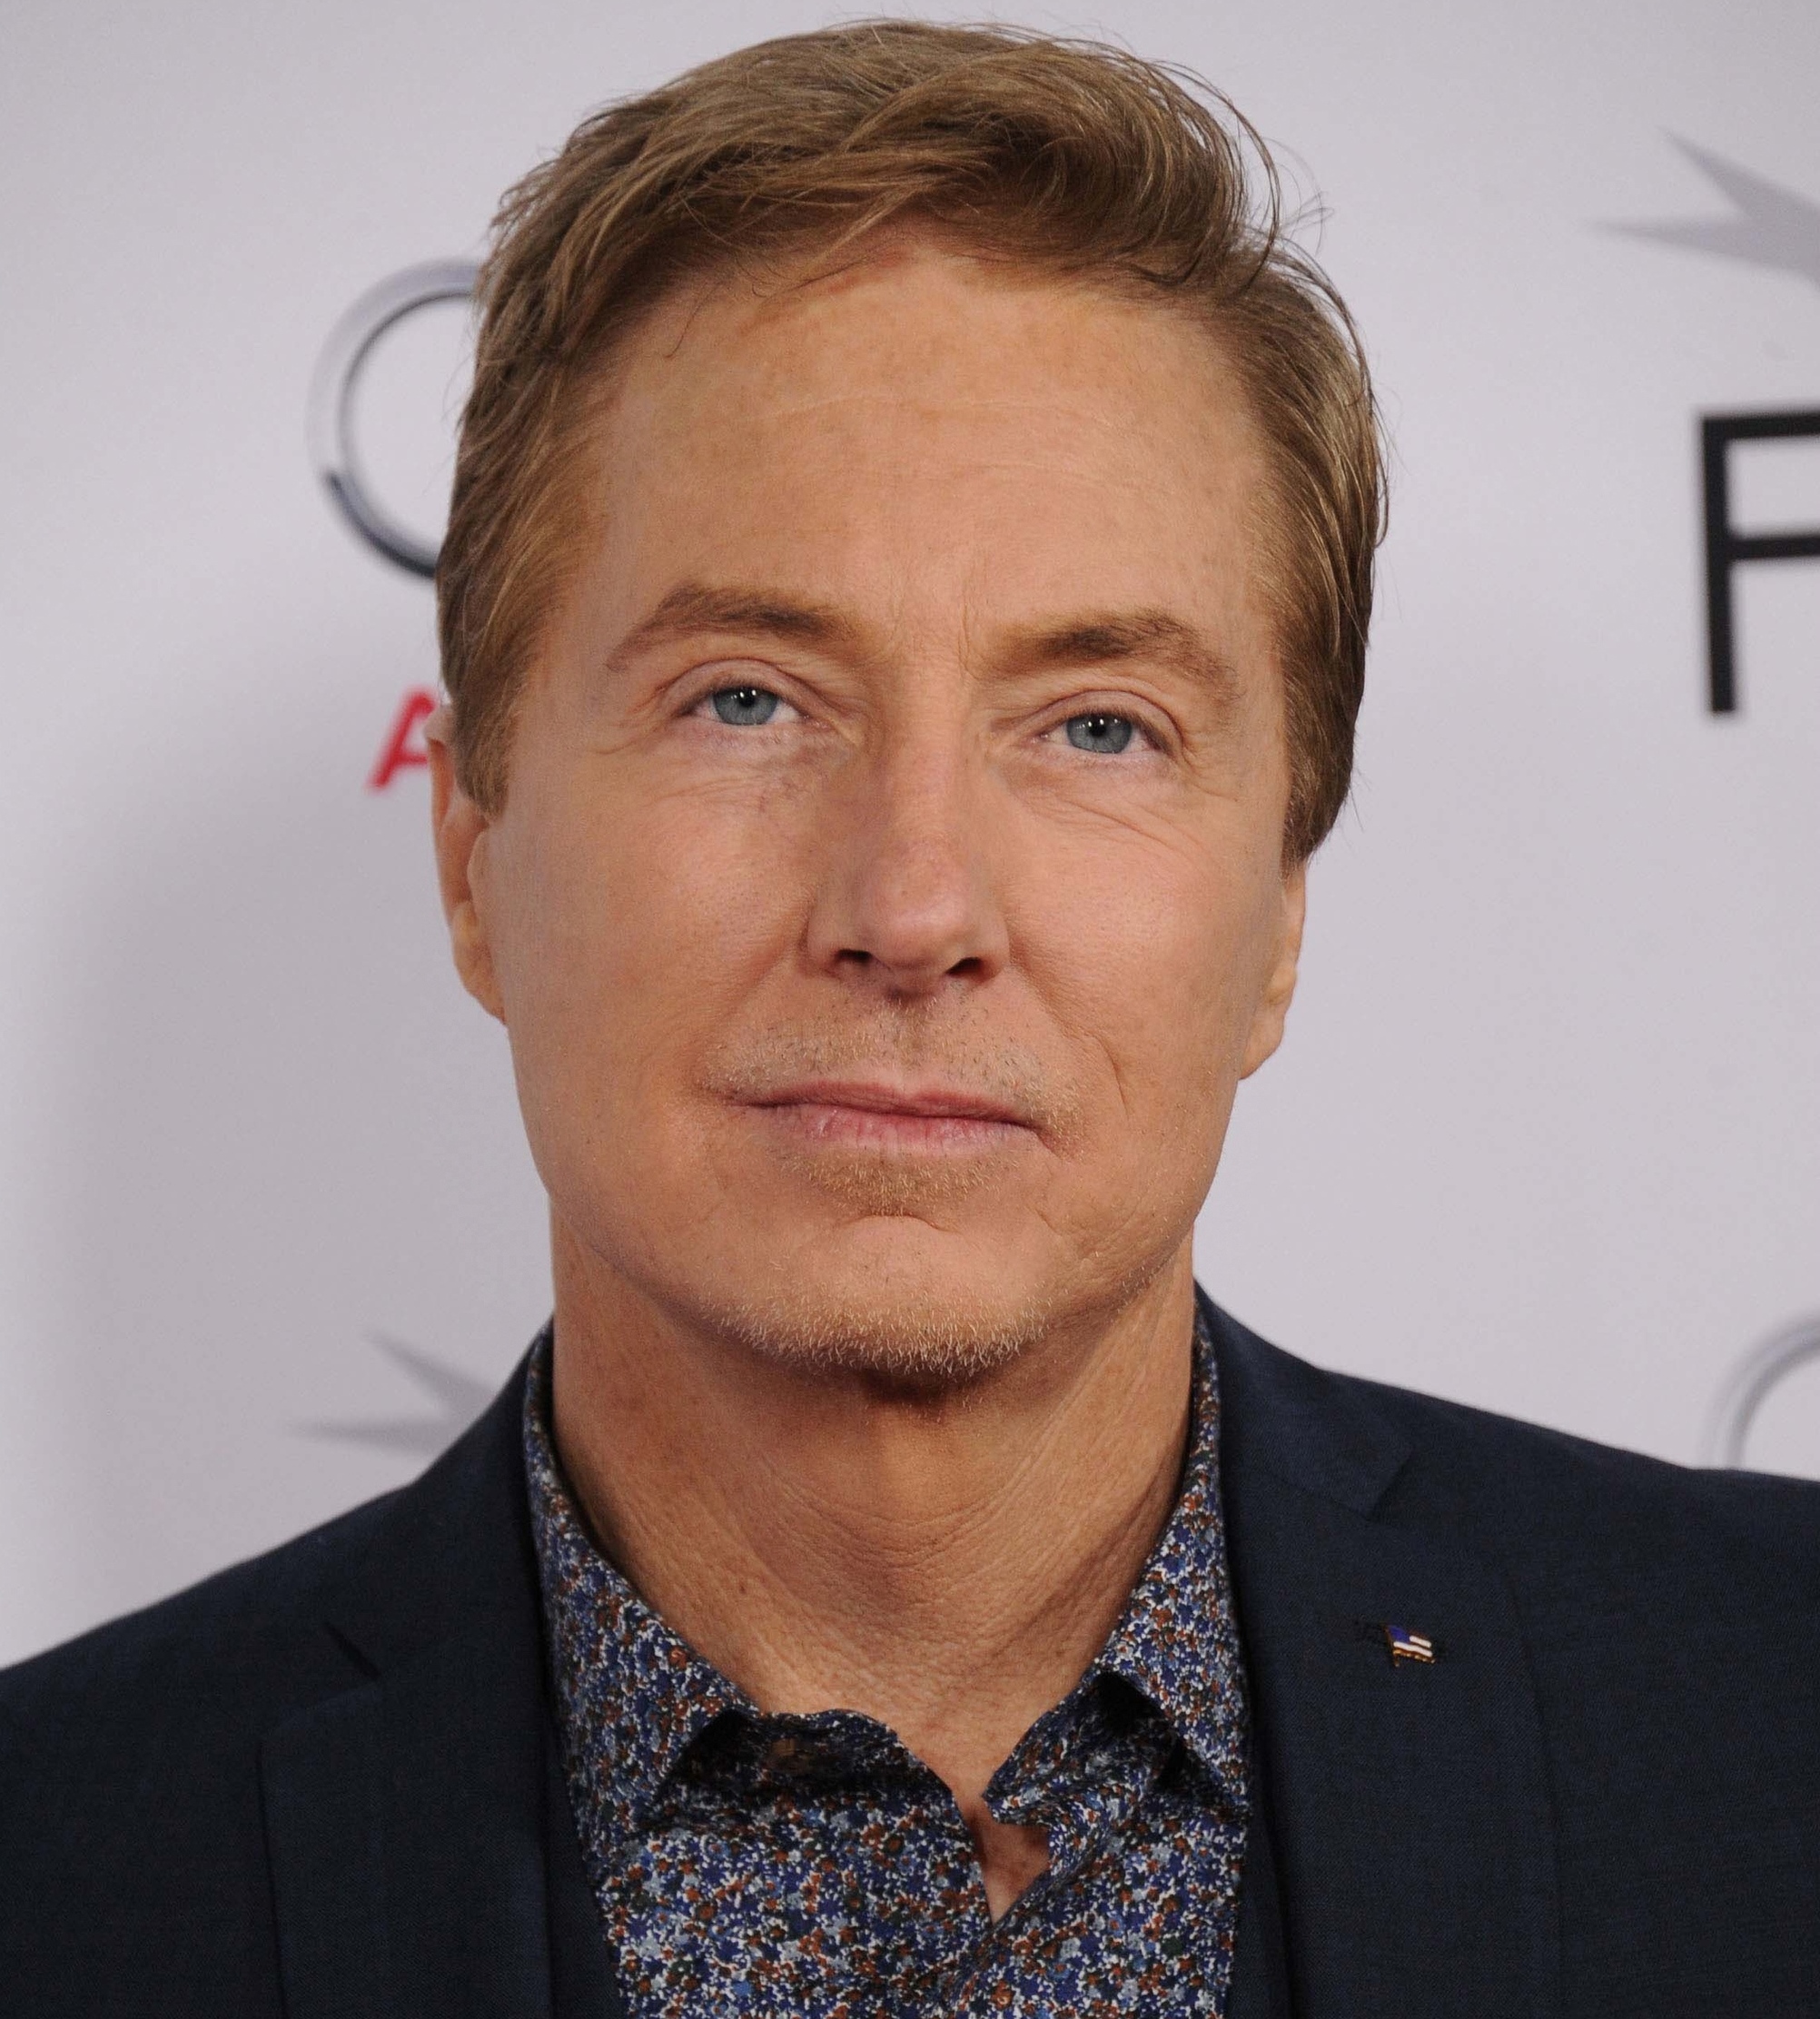 Actor Lee Perkins attends the premiere of Sony Pictures Classics' 'Foxcatcher' during AFI FEST 2014 presented by Audi at Dolby Theatre on November 13, 2014 in Hollywood, California.